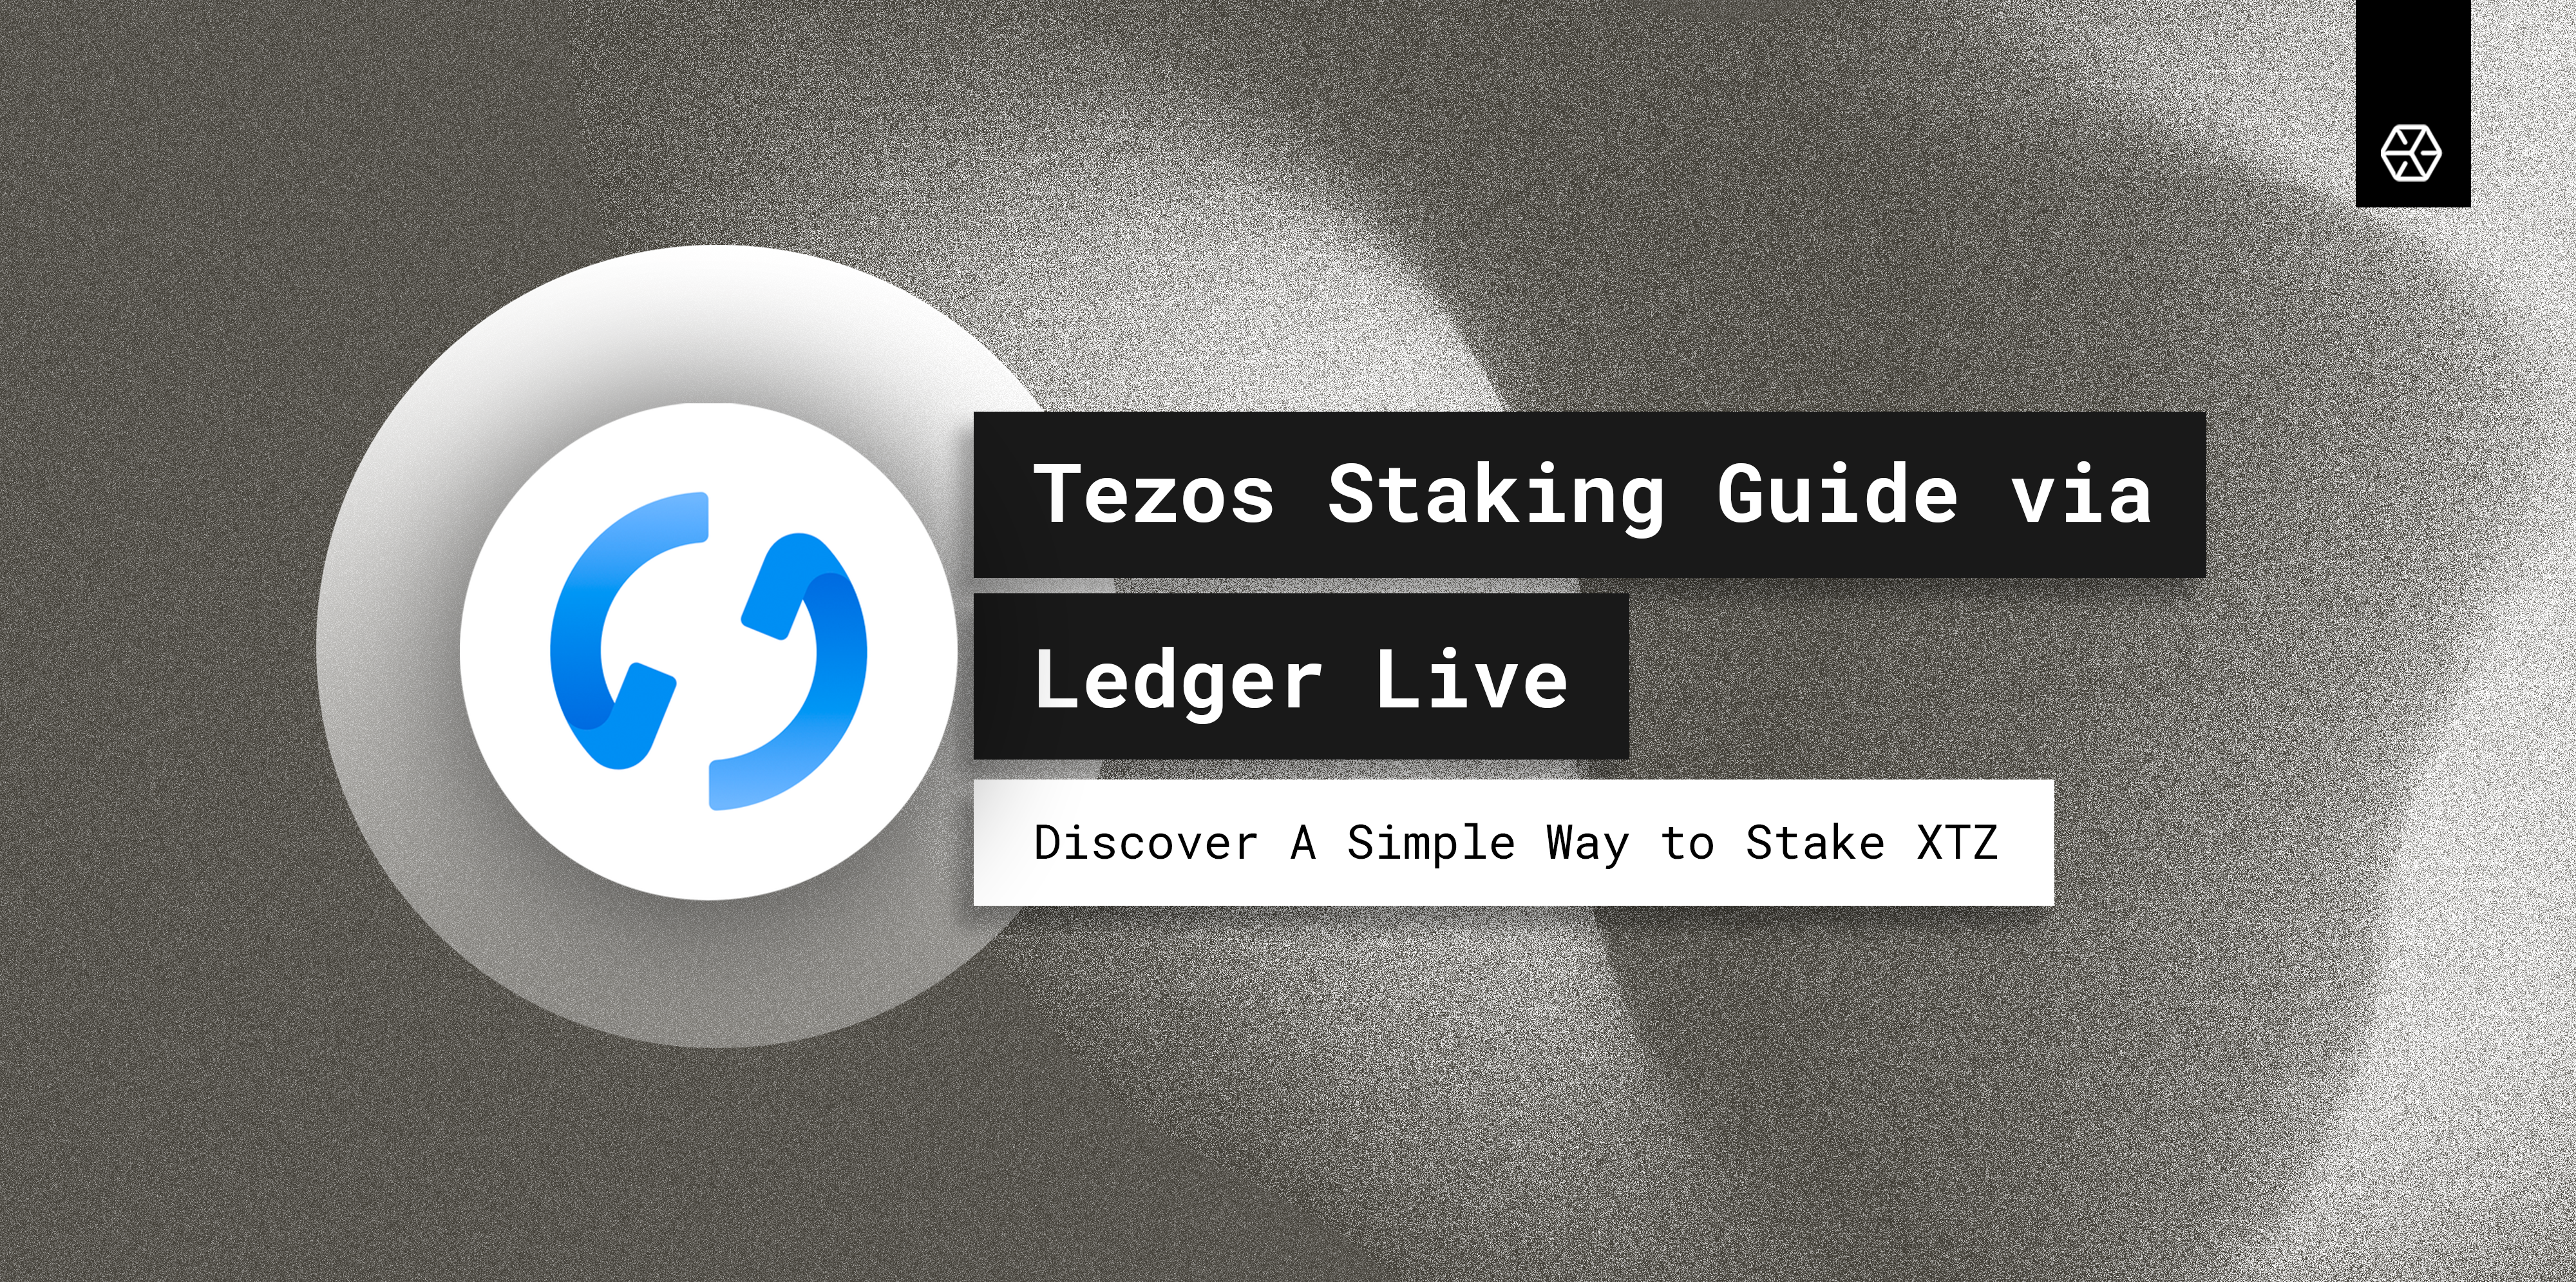 Tezos Staking Guide Via Ledger Live: A Simple Way To Stake Your XTZ